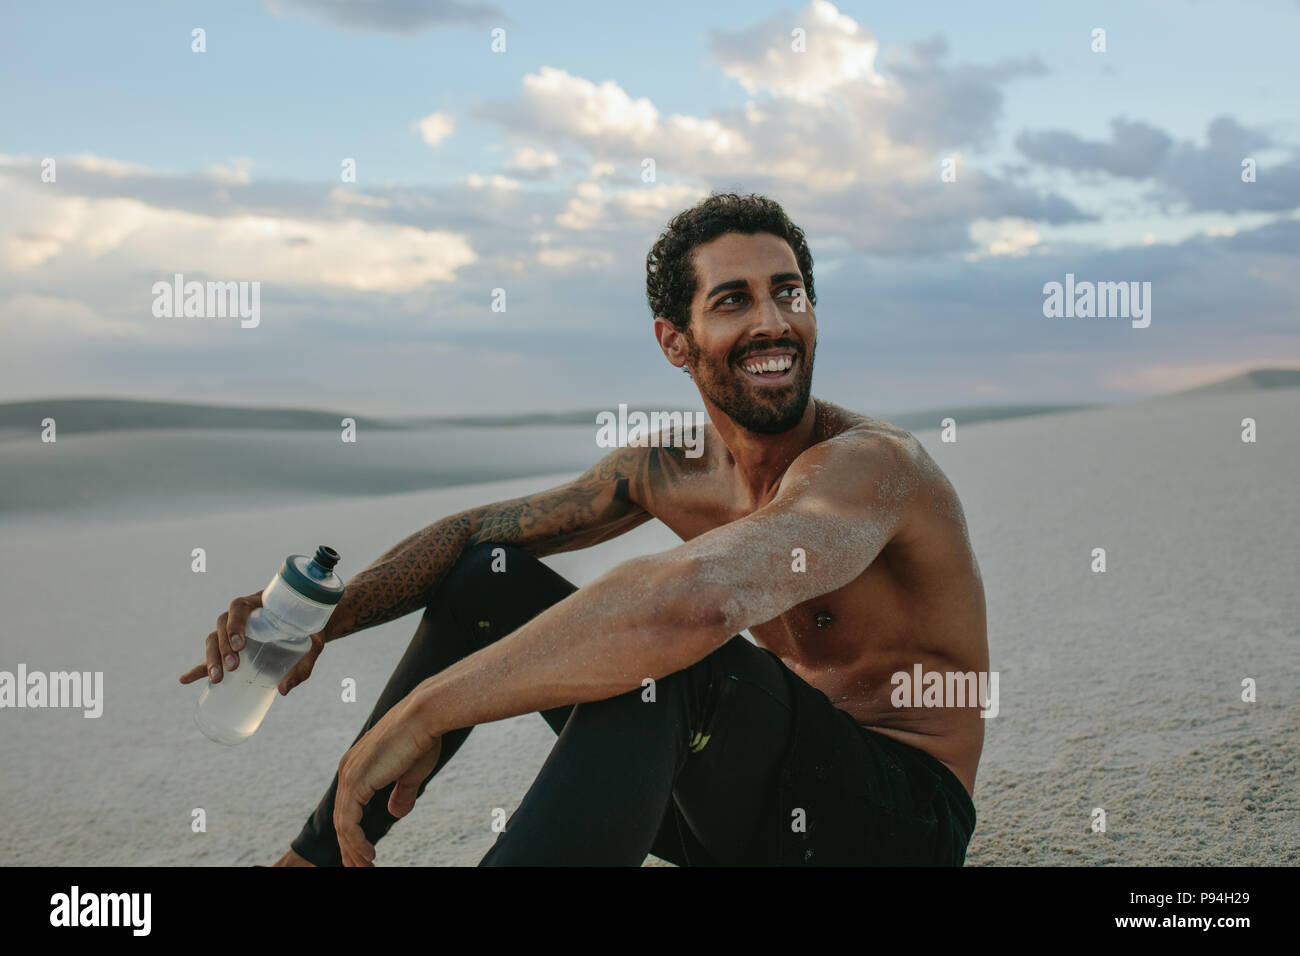 Smiling muscular male athlete sitting on desert sand with a water ball in hand. Tired man taking a break from training in desert. Stock Photo